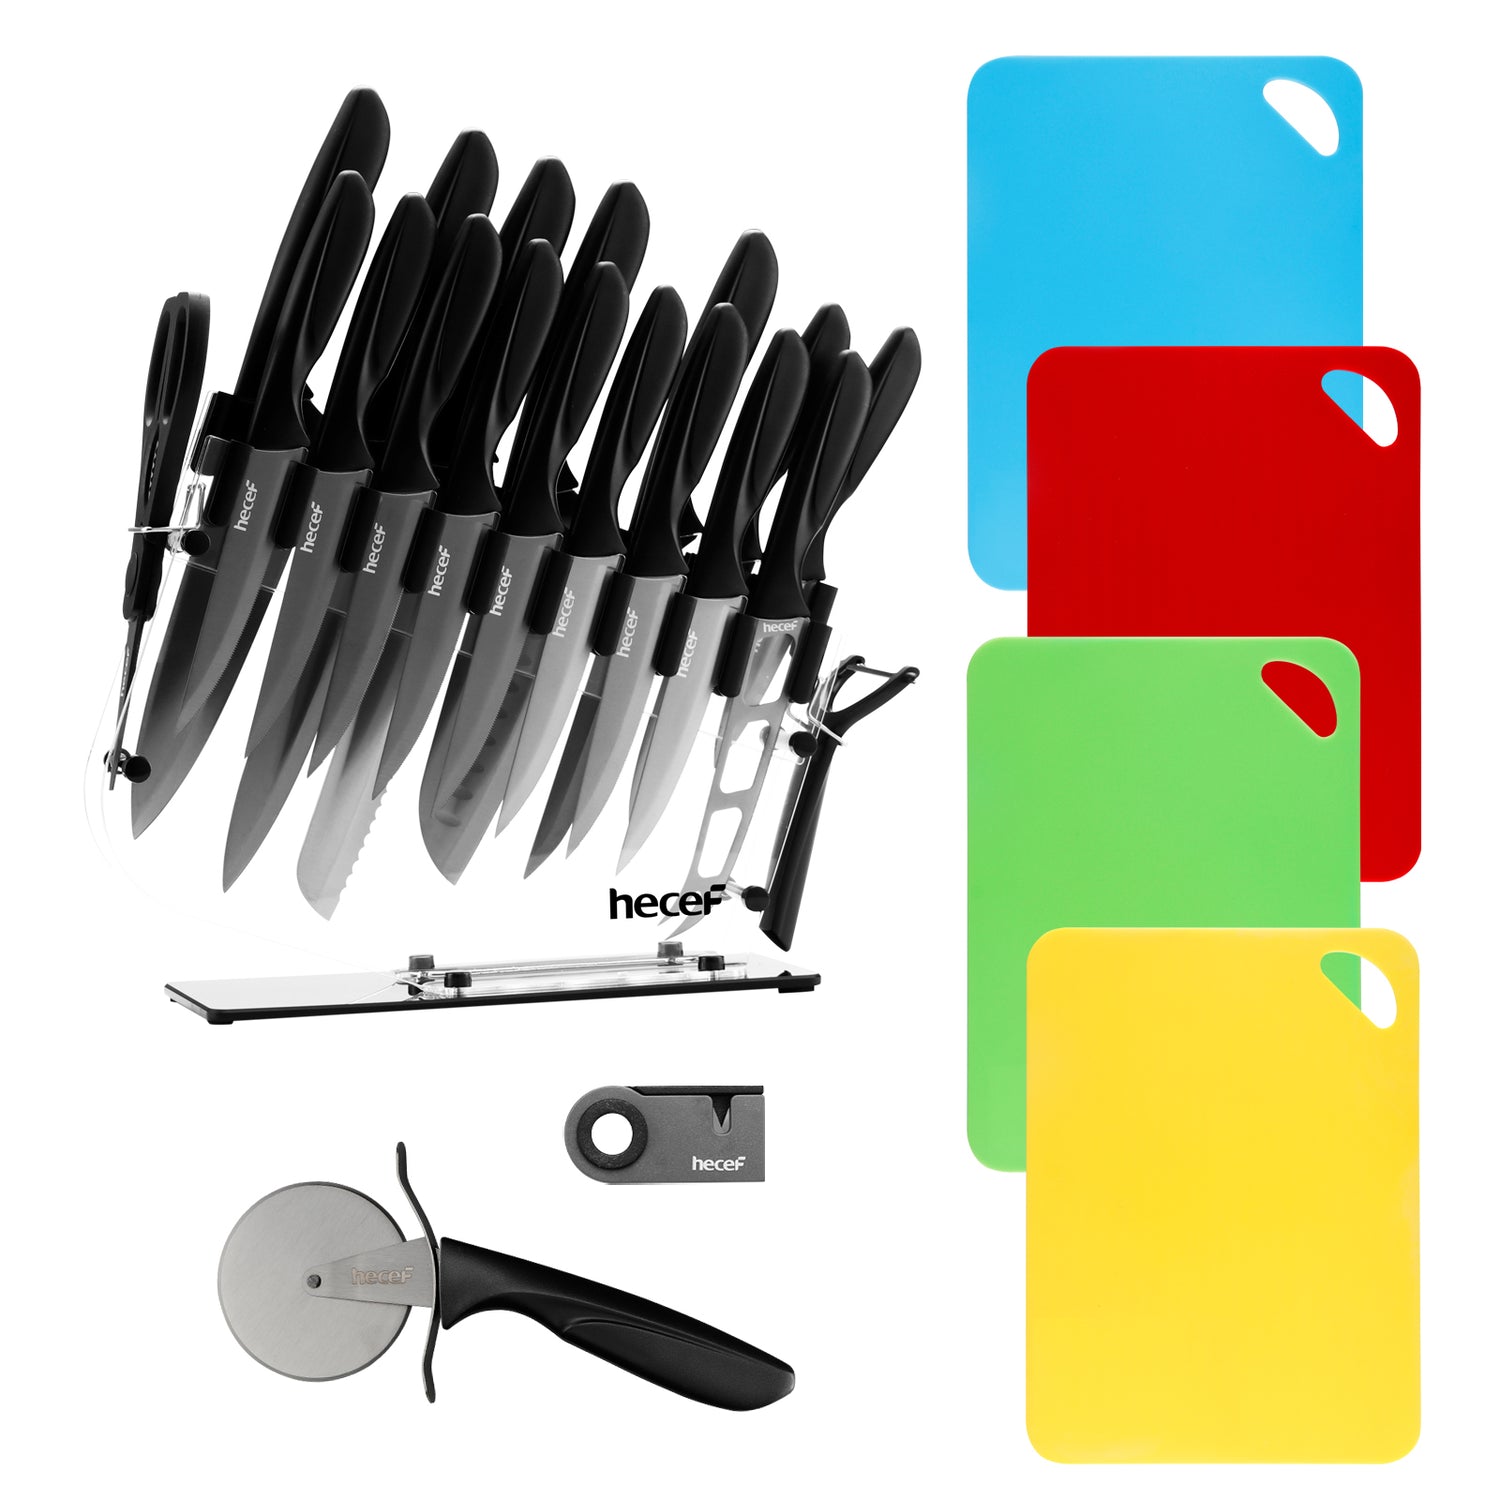 Hecef Kitchen Cutlery Knife Gift Set of 25 with Stand & Cutting Boards - Hecef Kitchen